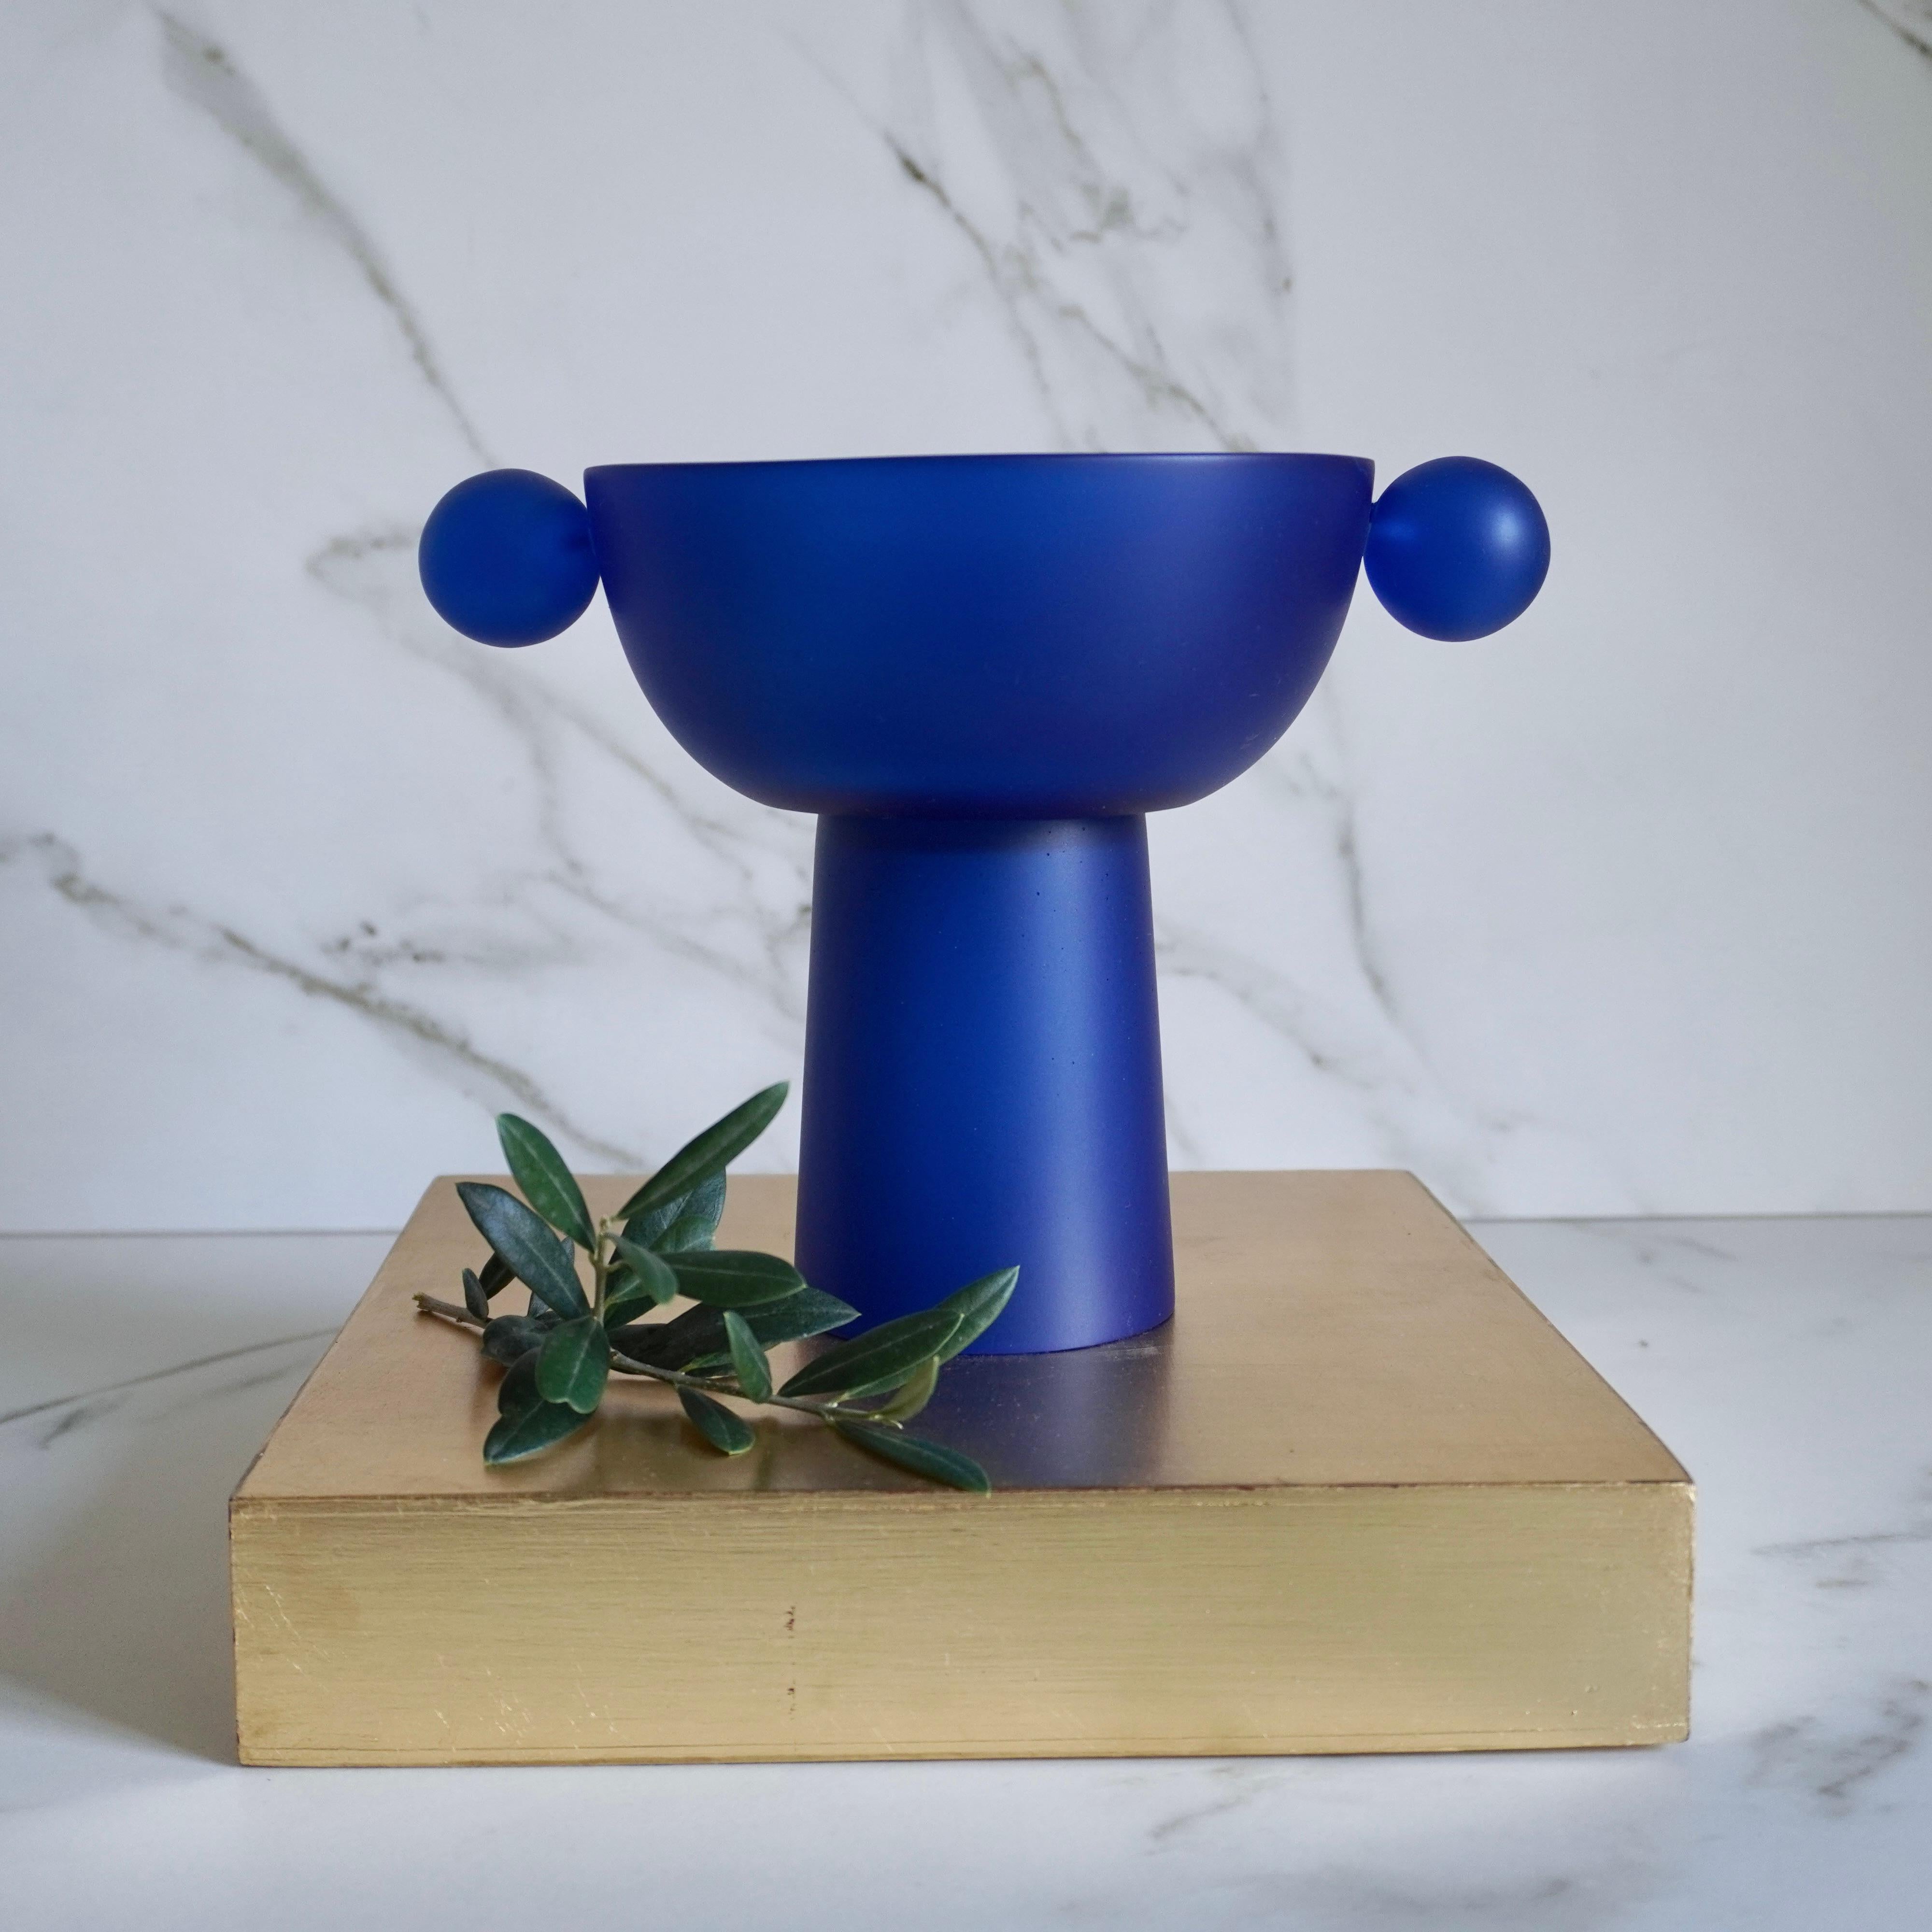 This small pedestal stands tall as a stately centerpiece or bookshelf display. The spheres give the piece a playful and modern look, making it a perfect statement piece for any space.

Color: Traslucid blue resin in satin finish.

Designed by